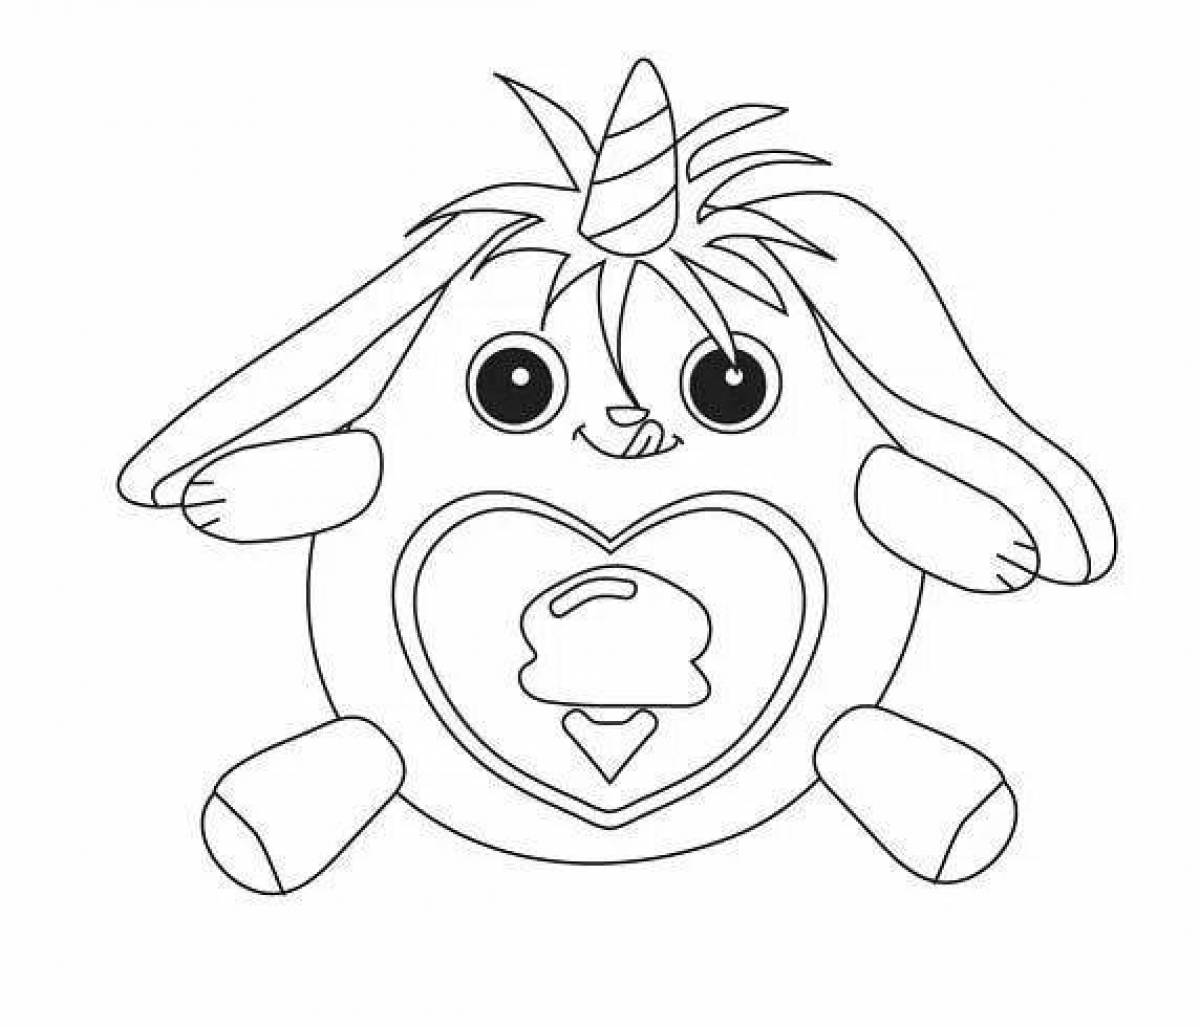 Fancy rainbow horns coloring page